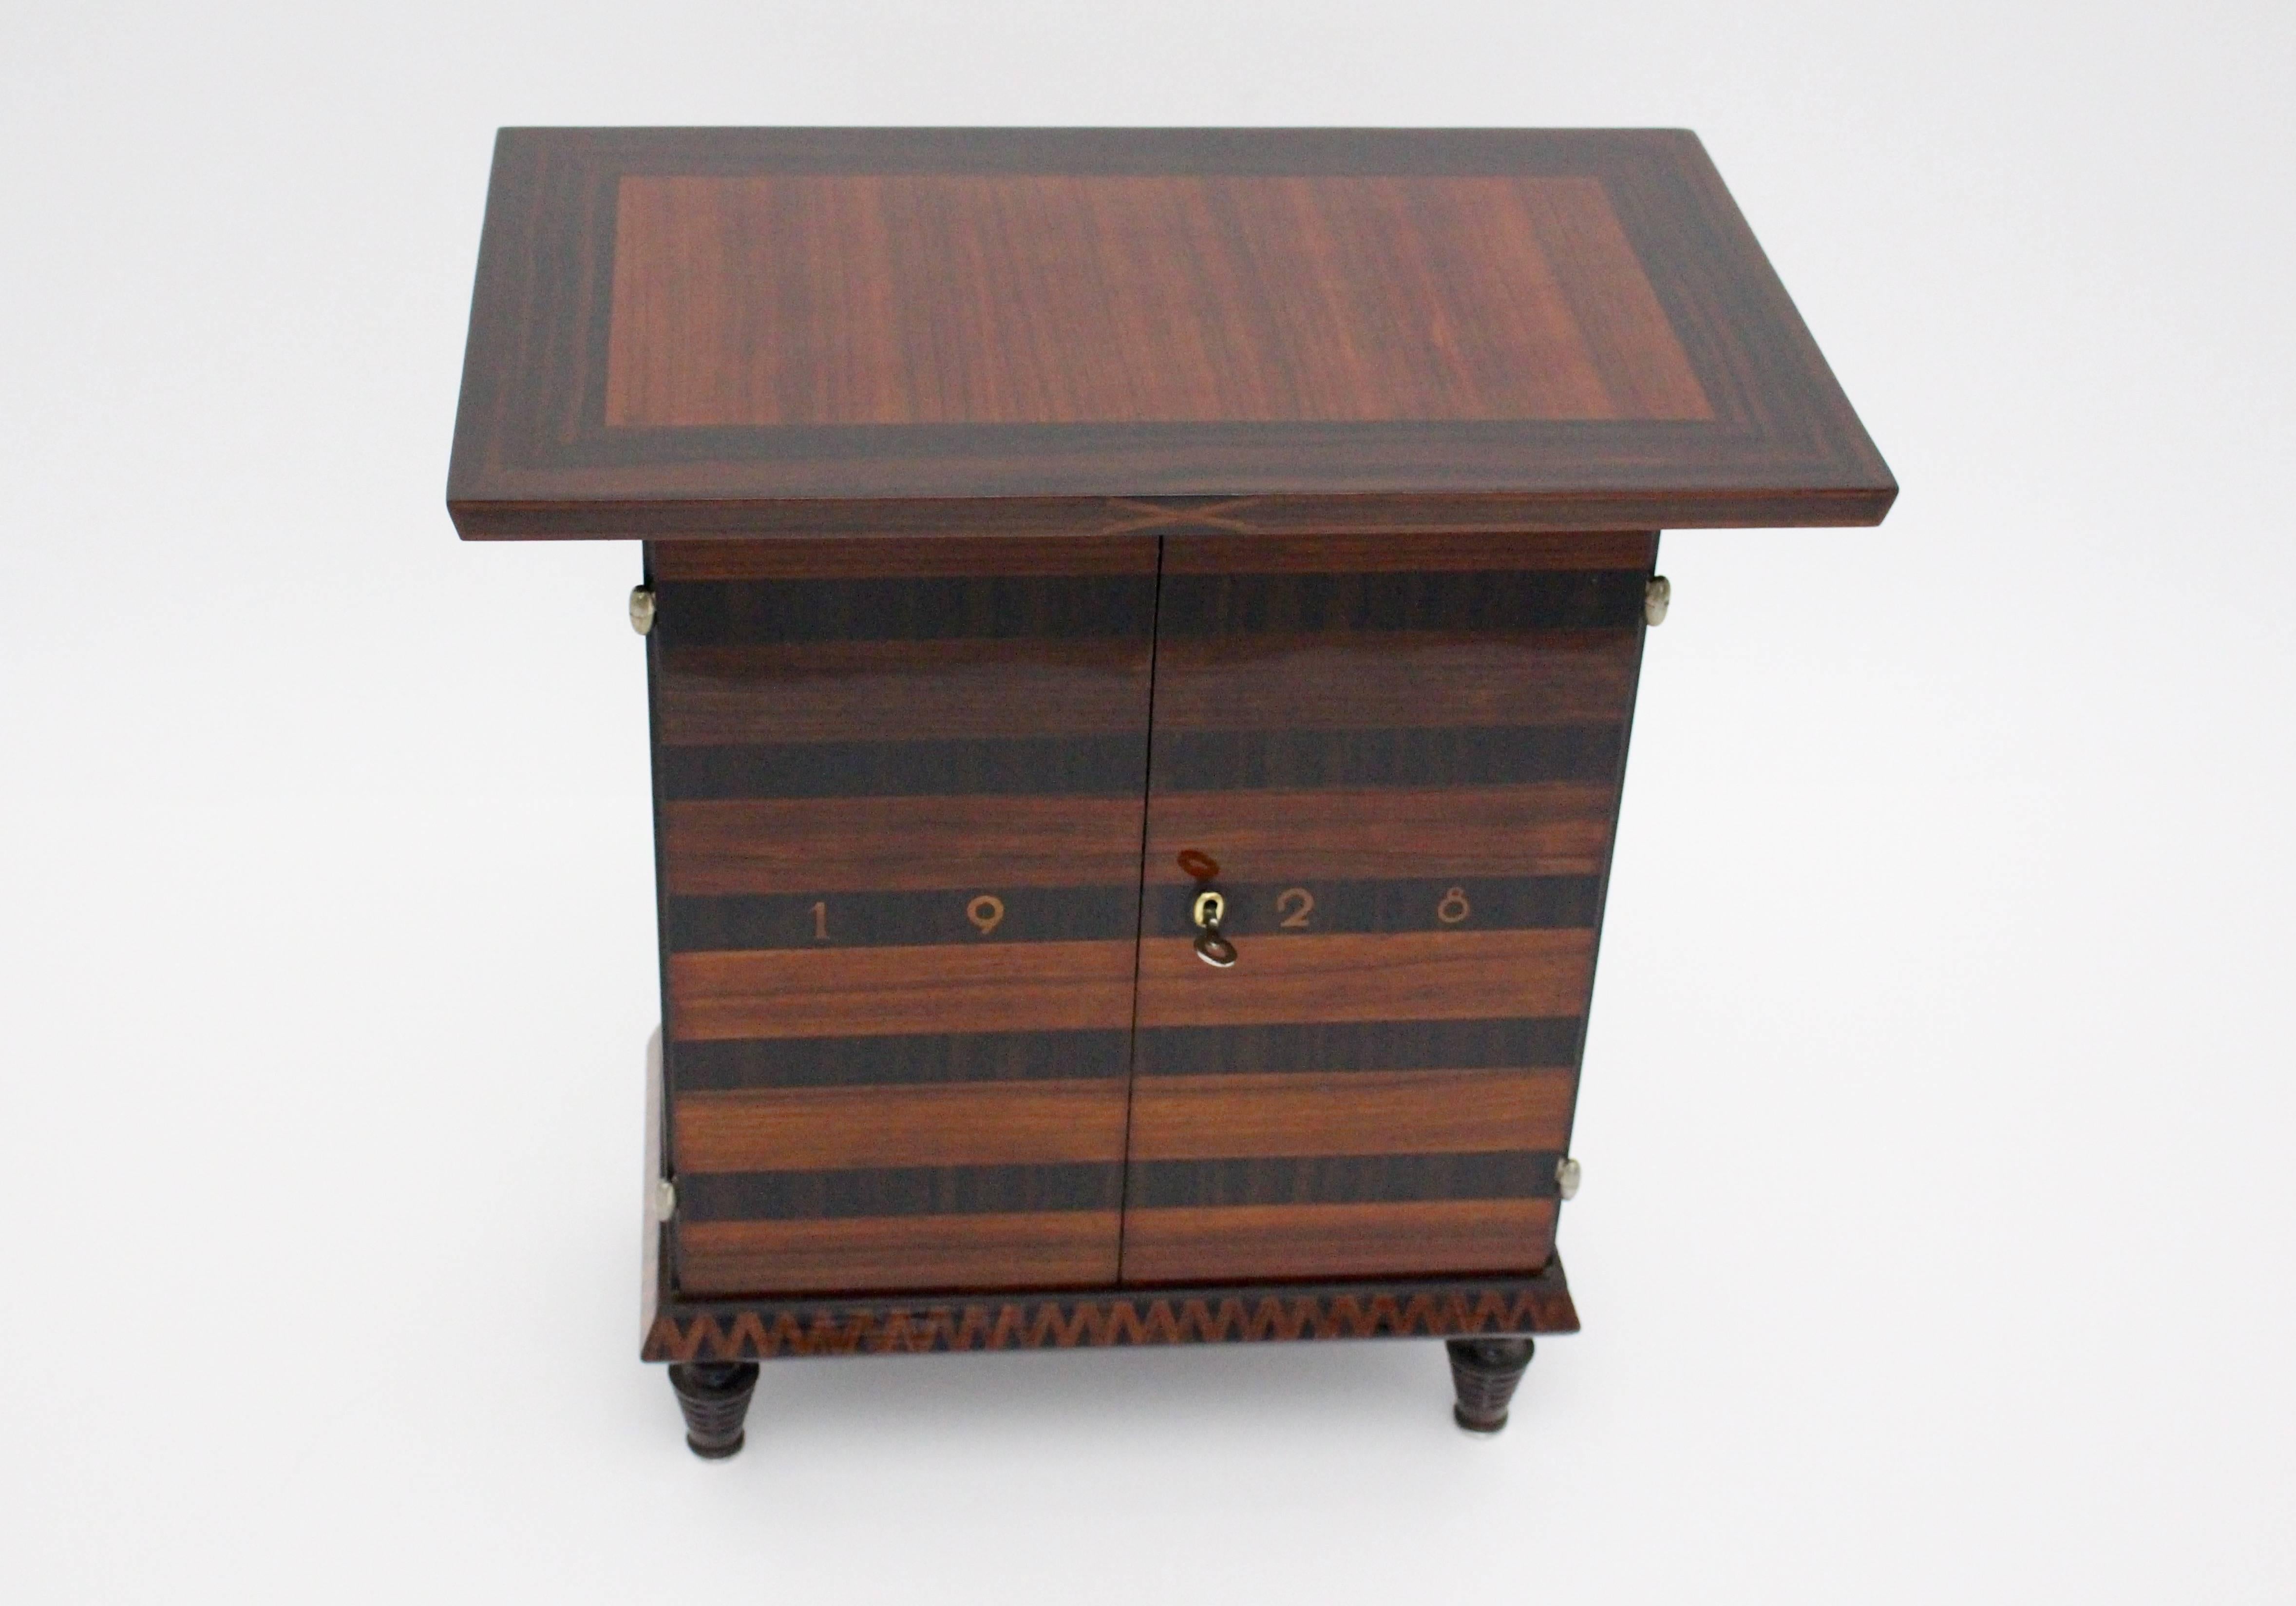 Art Deco vintage side table or casket from rosewood and beech, 1928, Austria.
This unique casket shows veneers and inlays with rosewood and beechwood and features beautiful inlays and ornaments with 4 curved bobbin feet.
A stunning side table with